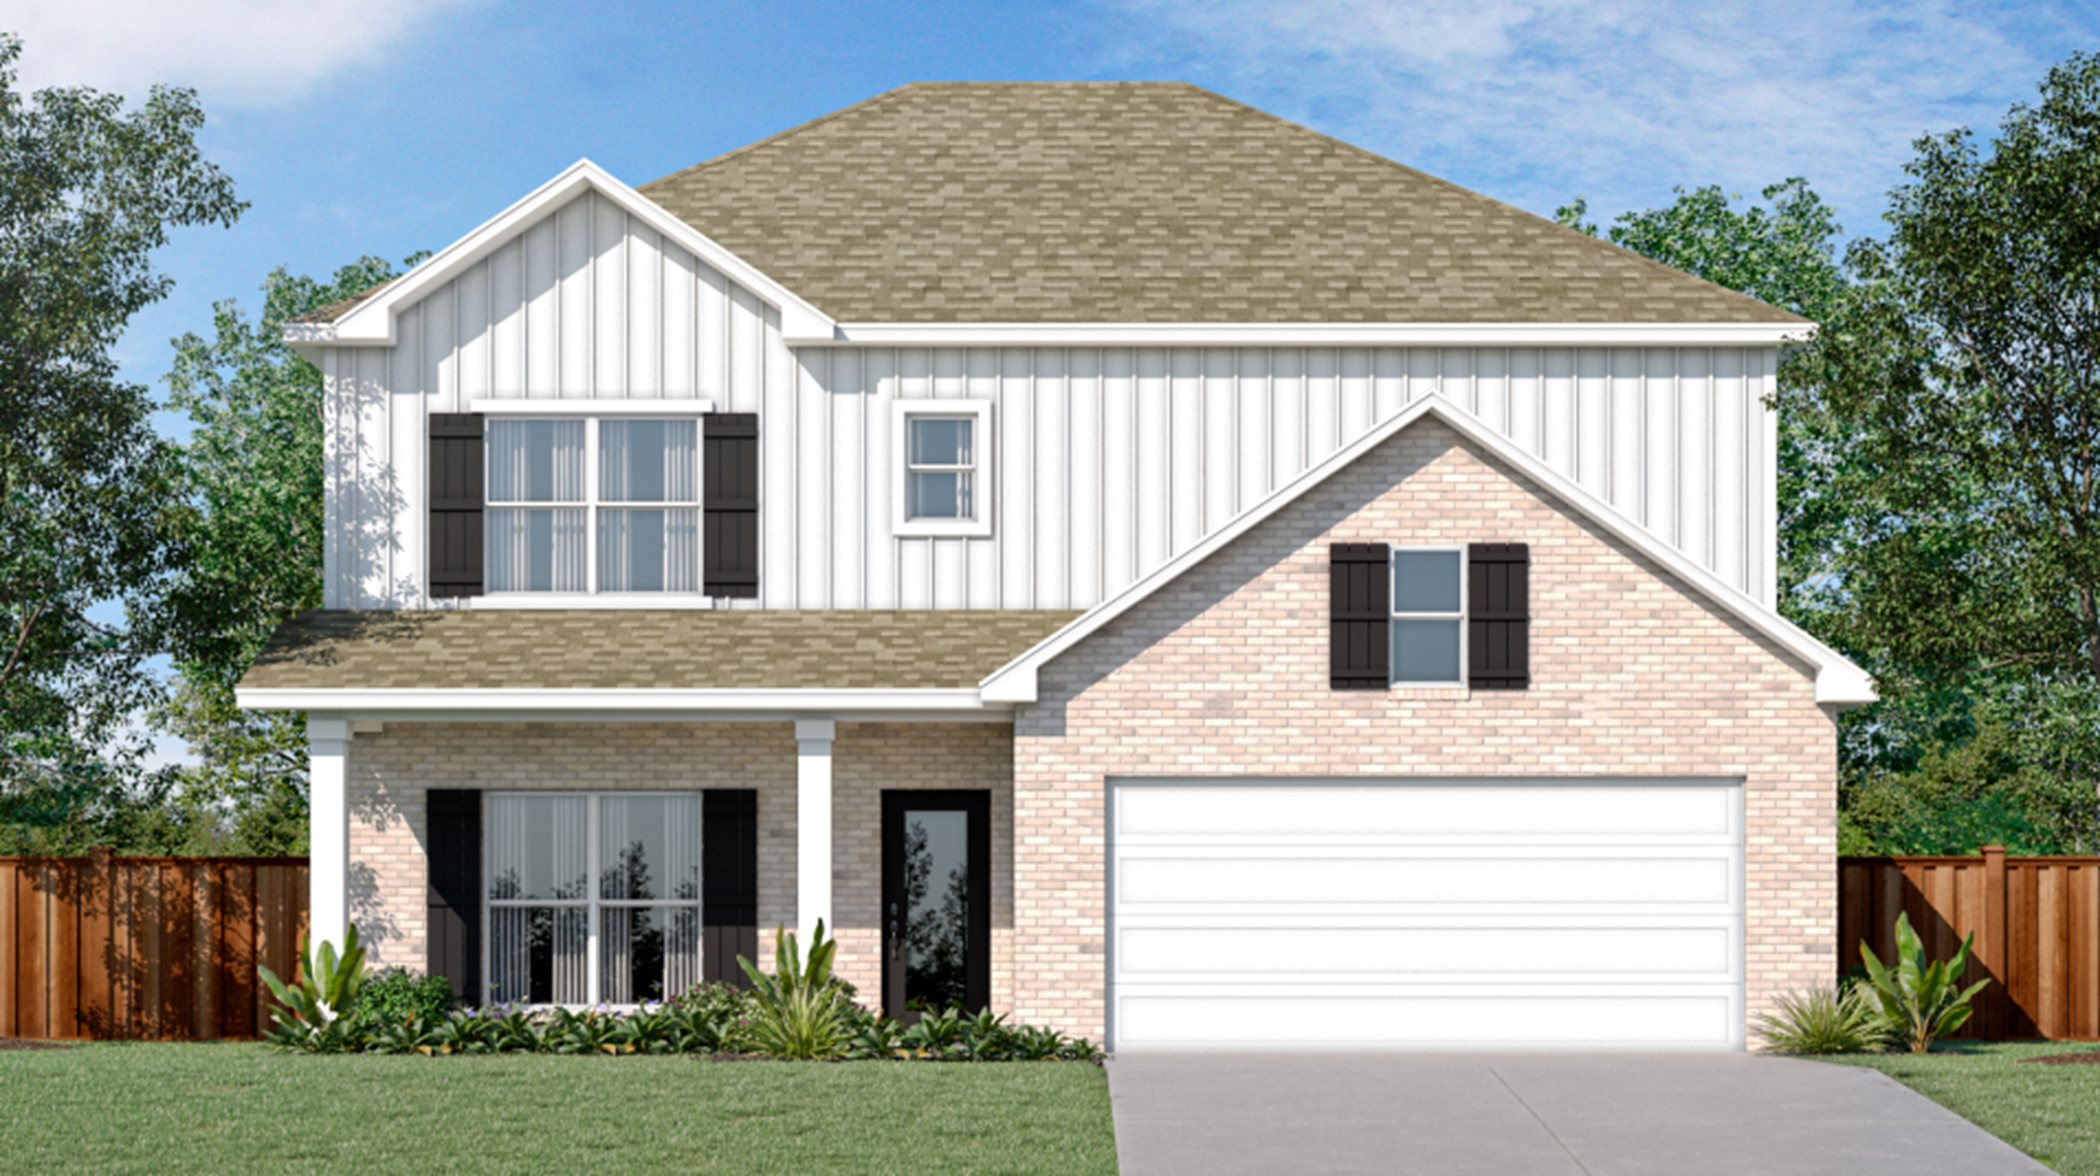 2440 exterior with brick siding and shutters